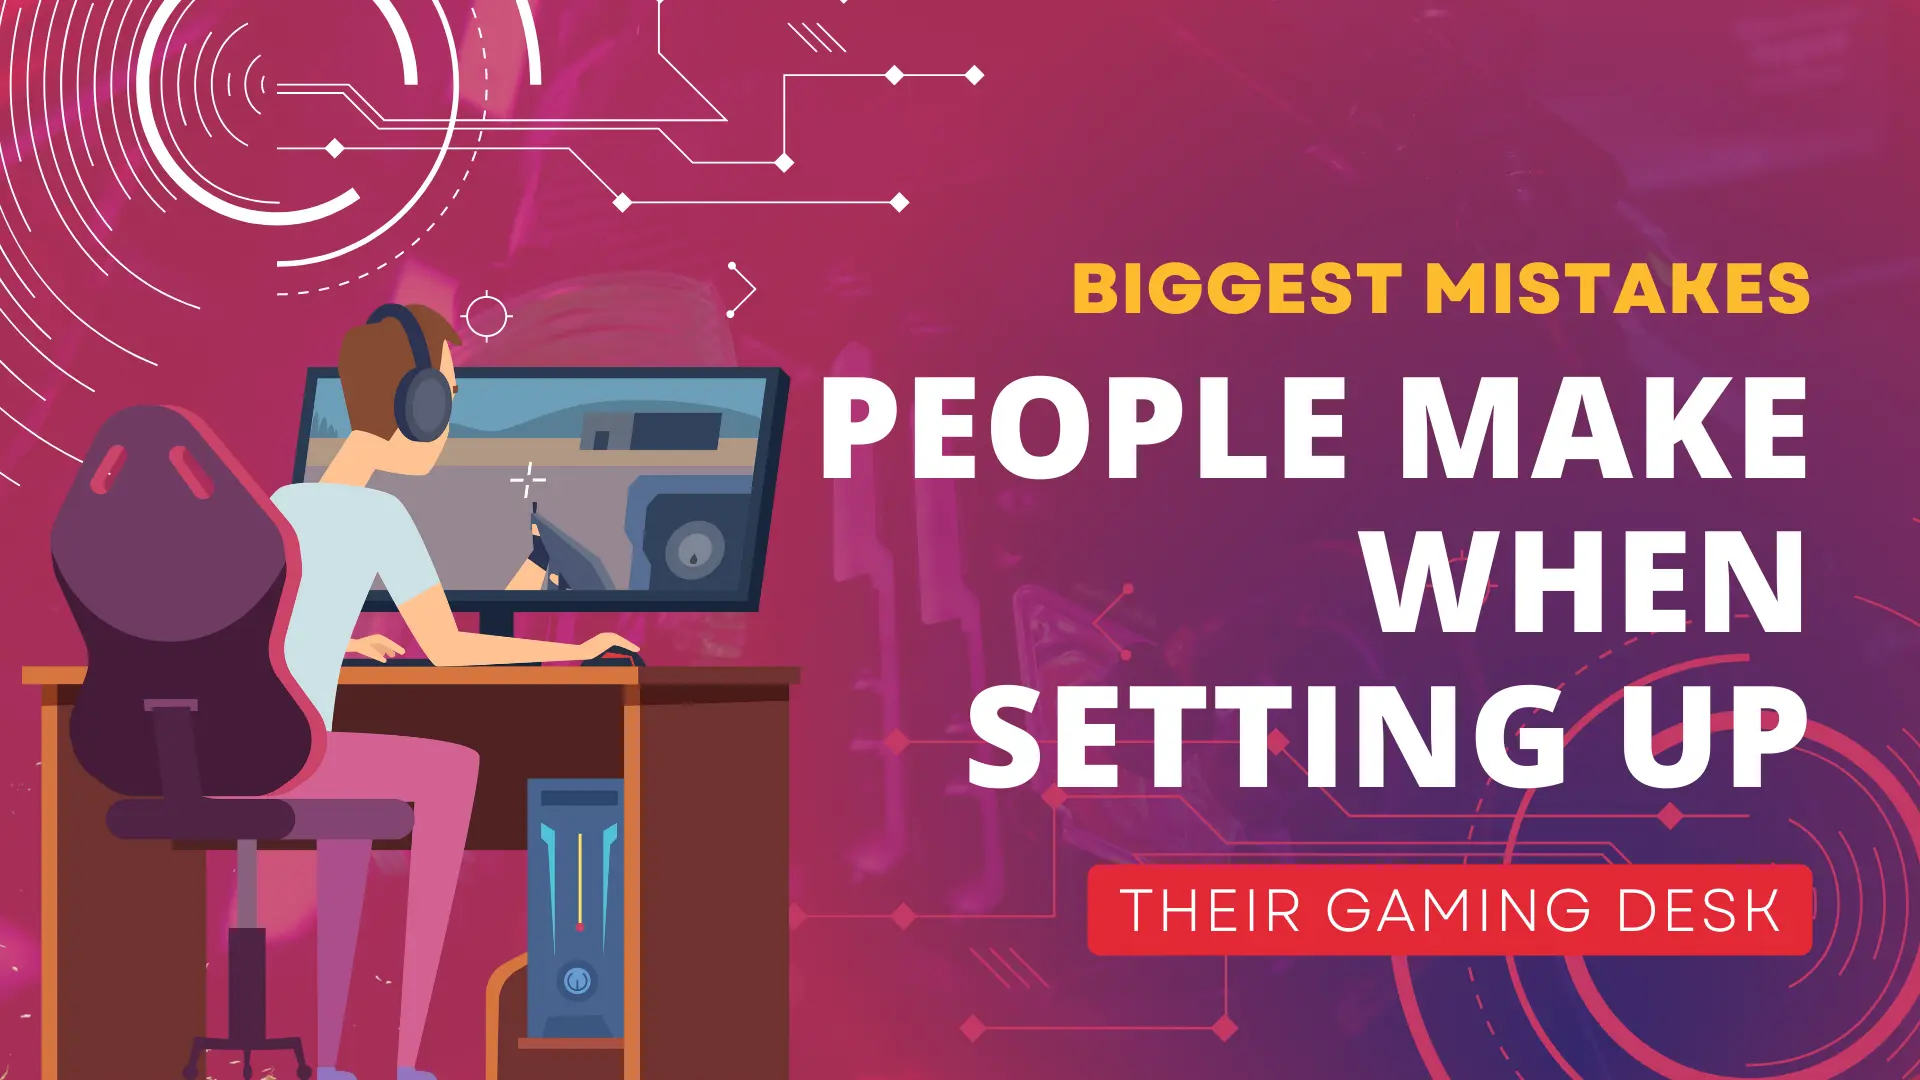 The Biggest Mistakes People Make When Setting Up Their Gaming Desk